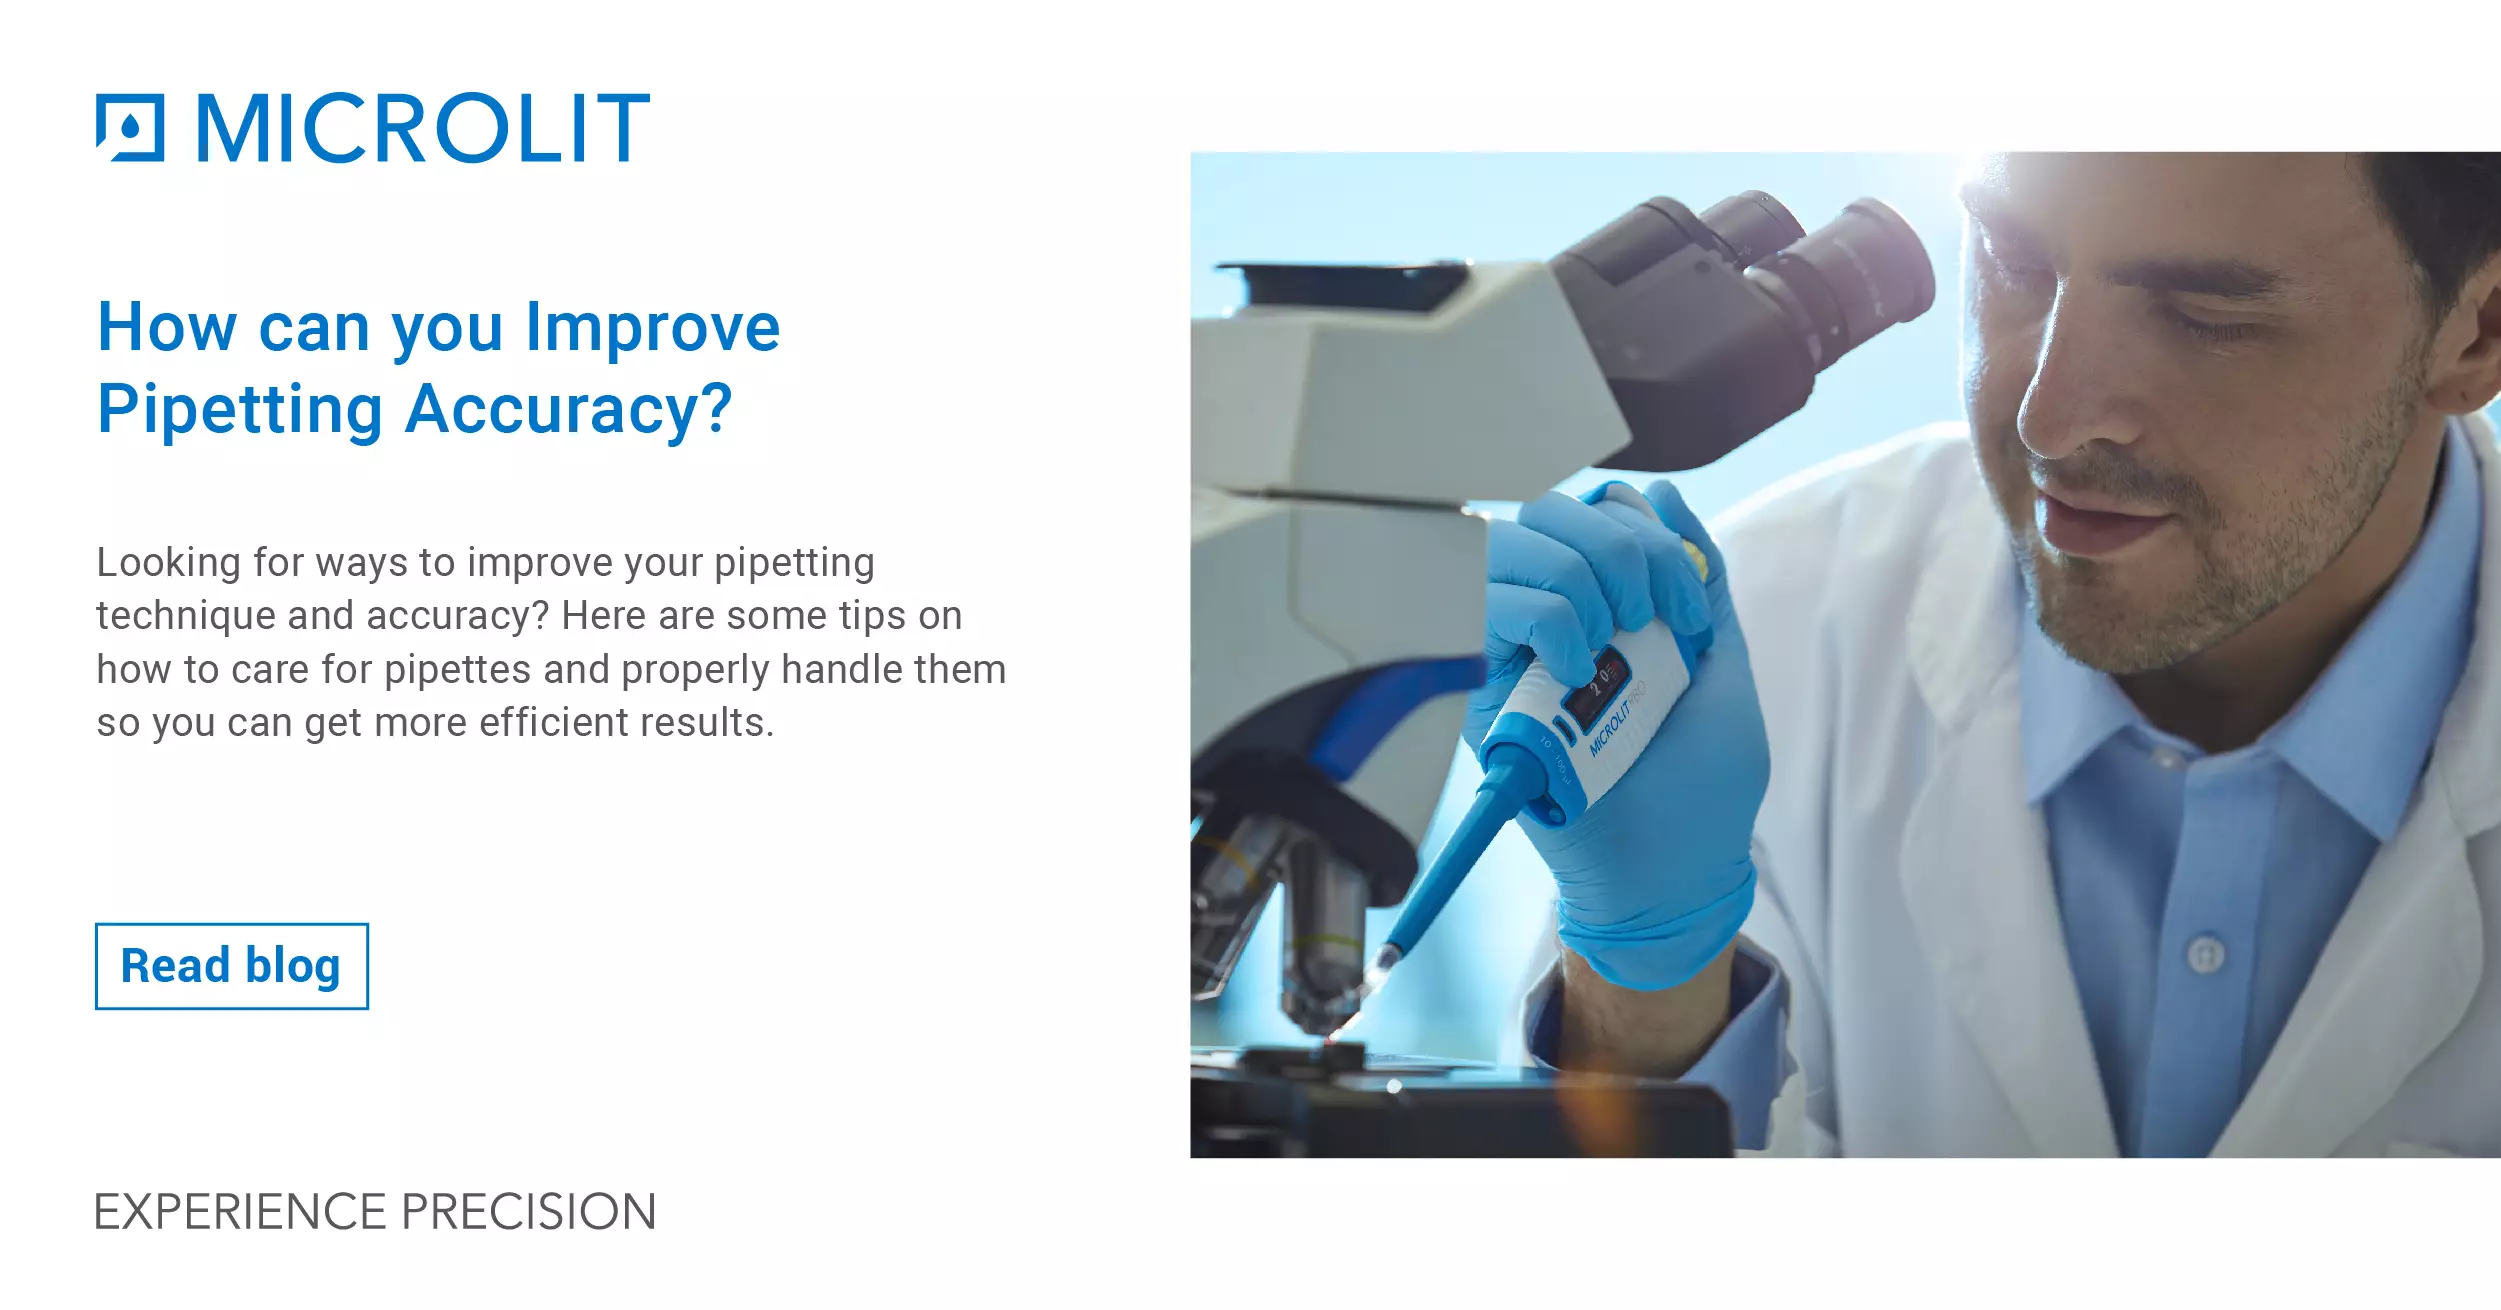 How can you improve Pipetting Accuracy?